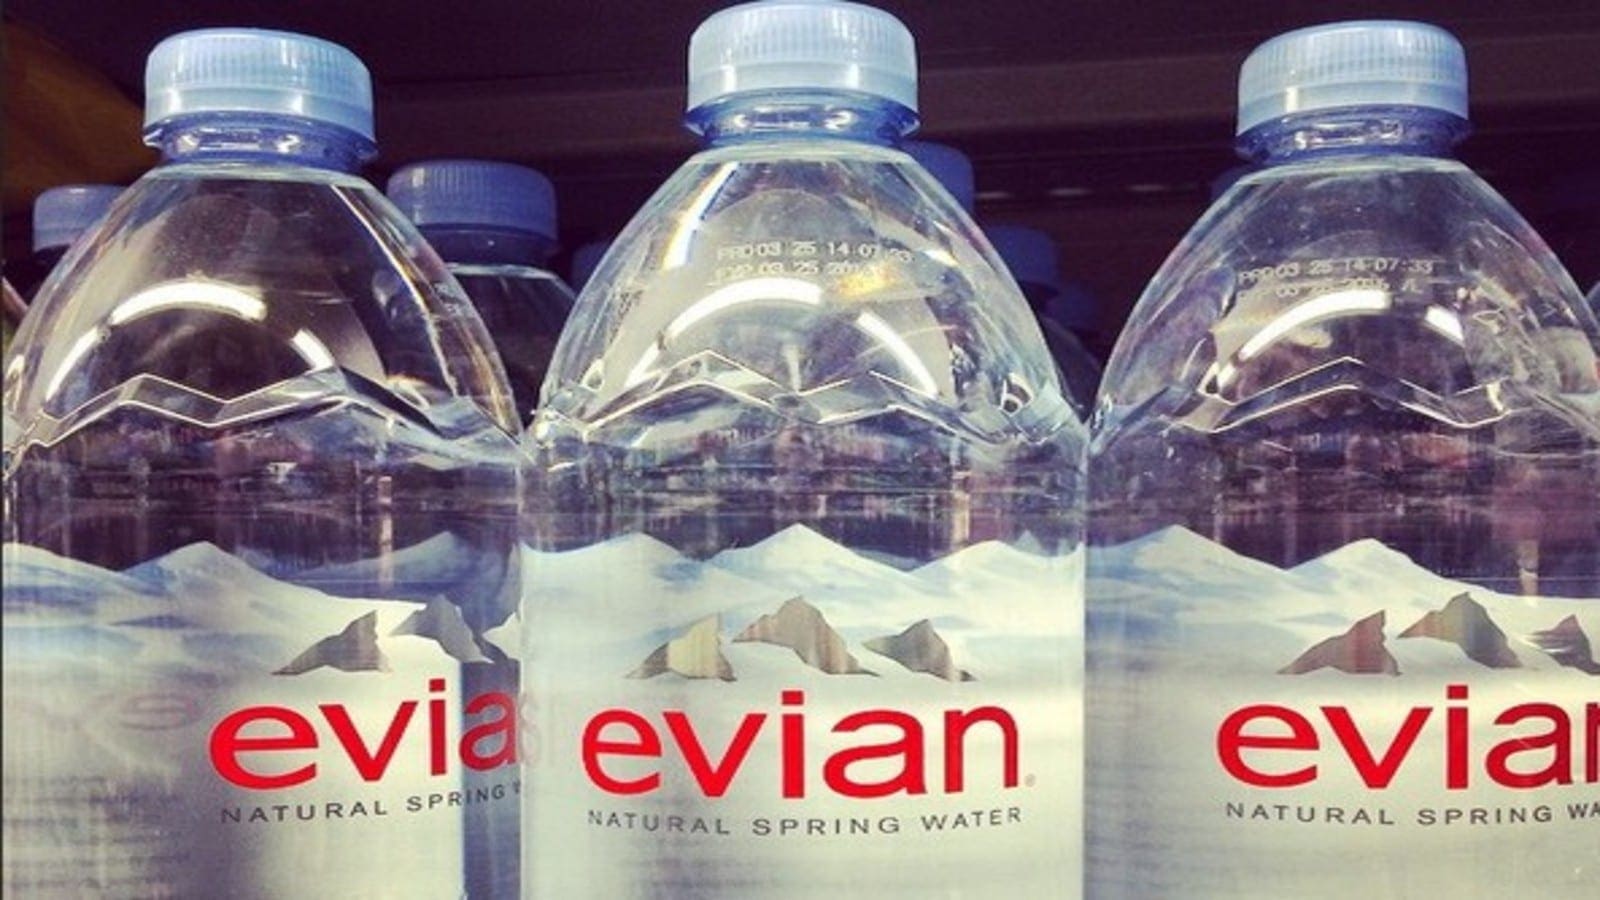 Danone partners with PepsiCo to be distributor of Evian natural spring water in Canada